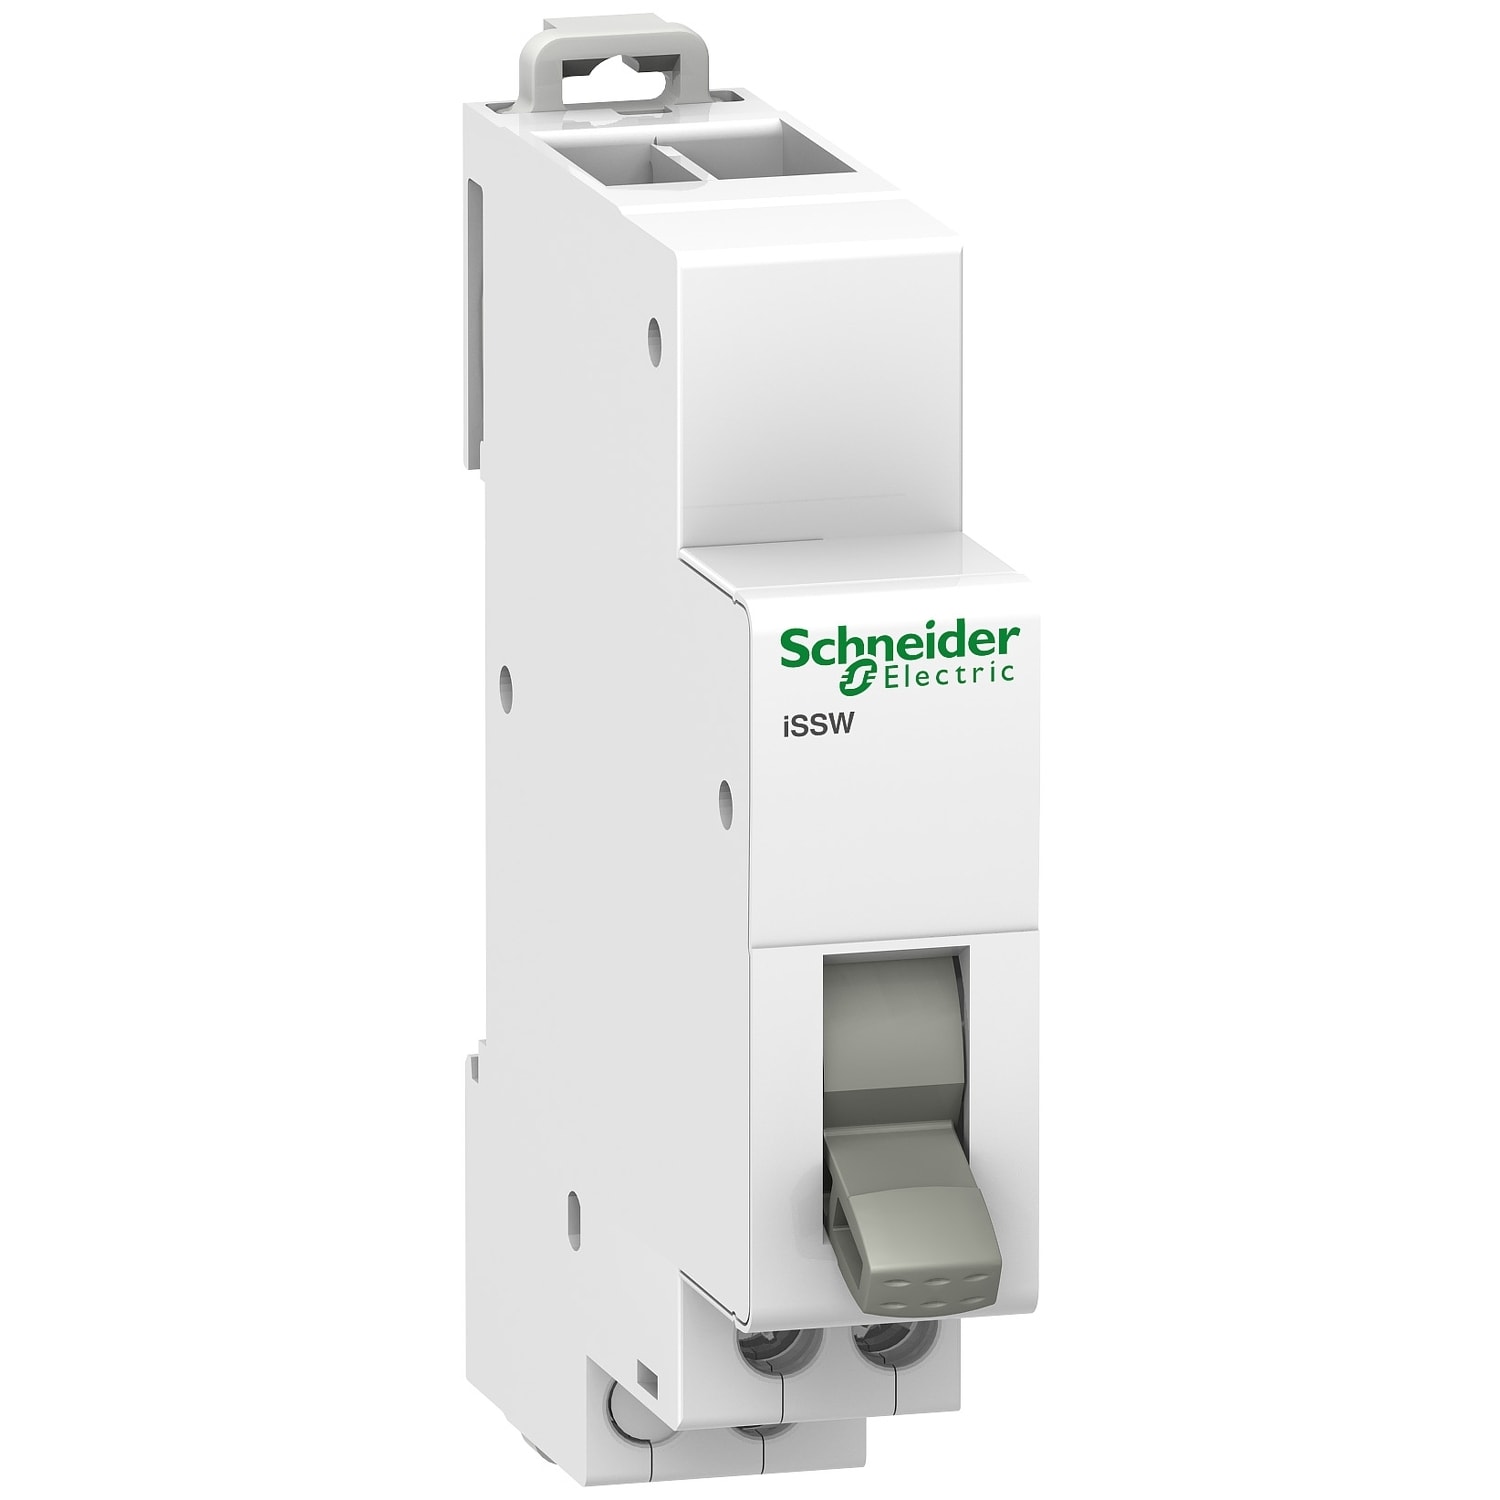 Schneider Electric - Acti9, iSSW commutateur 3 positions 1 contact inverseur OF 20A 230V